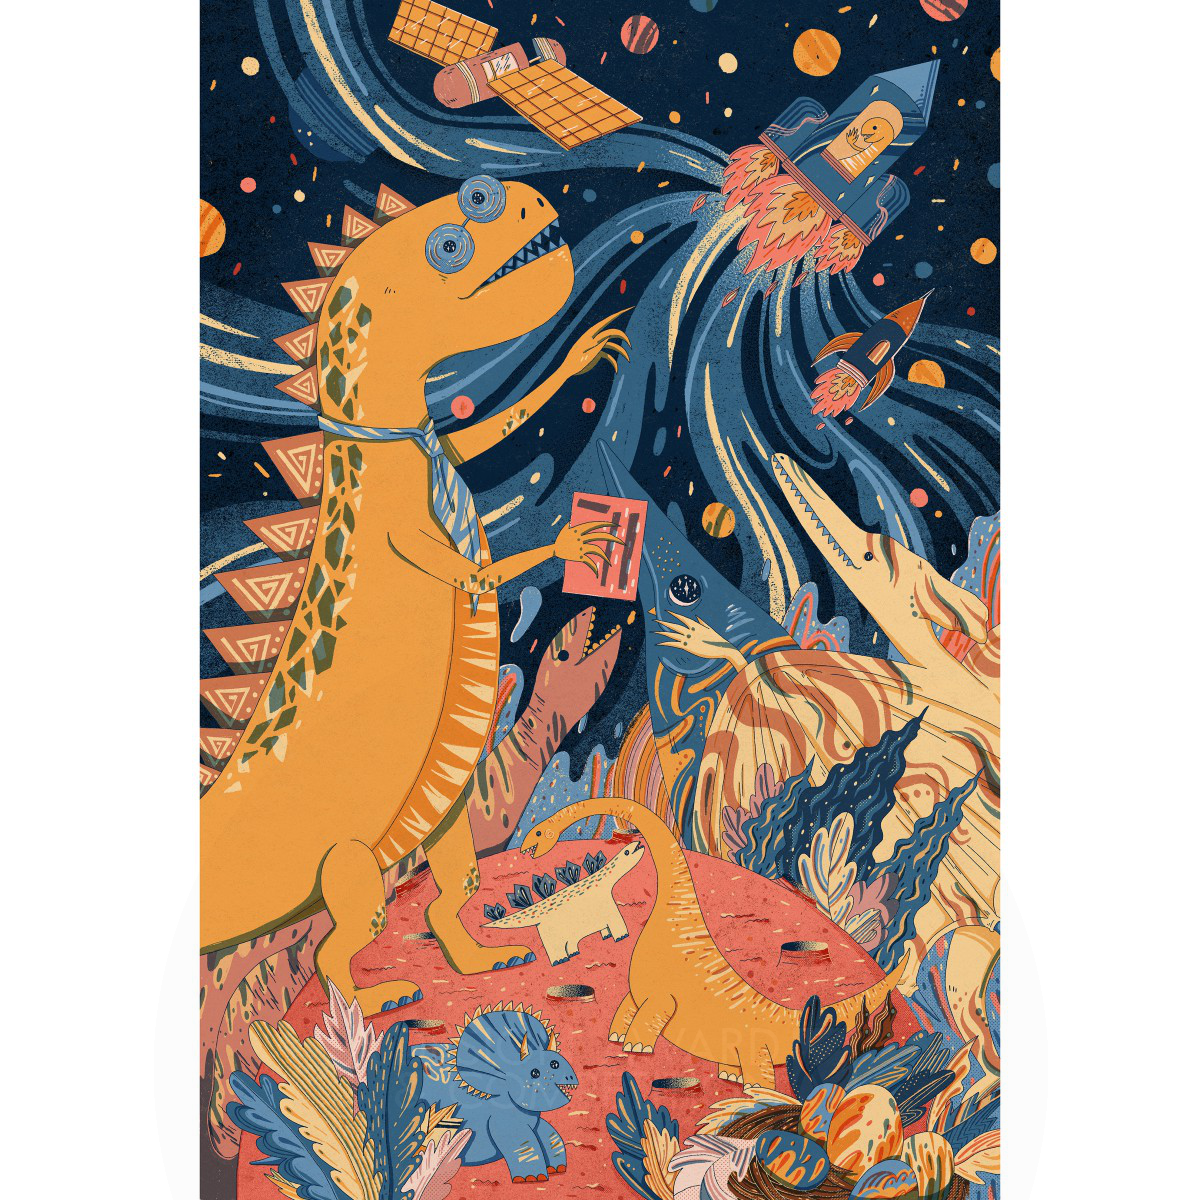 Zhiwen Tang wins Bronze at the prestigious A' Graphics, Illustration and Visual Communication Design Award with Lunar Dinosaur Fantasy World Self Promotion.